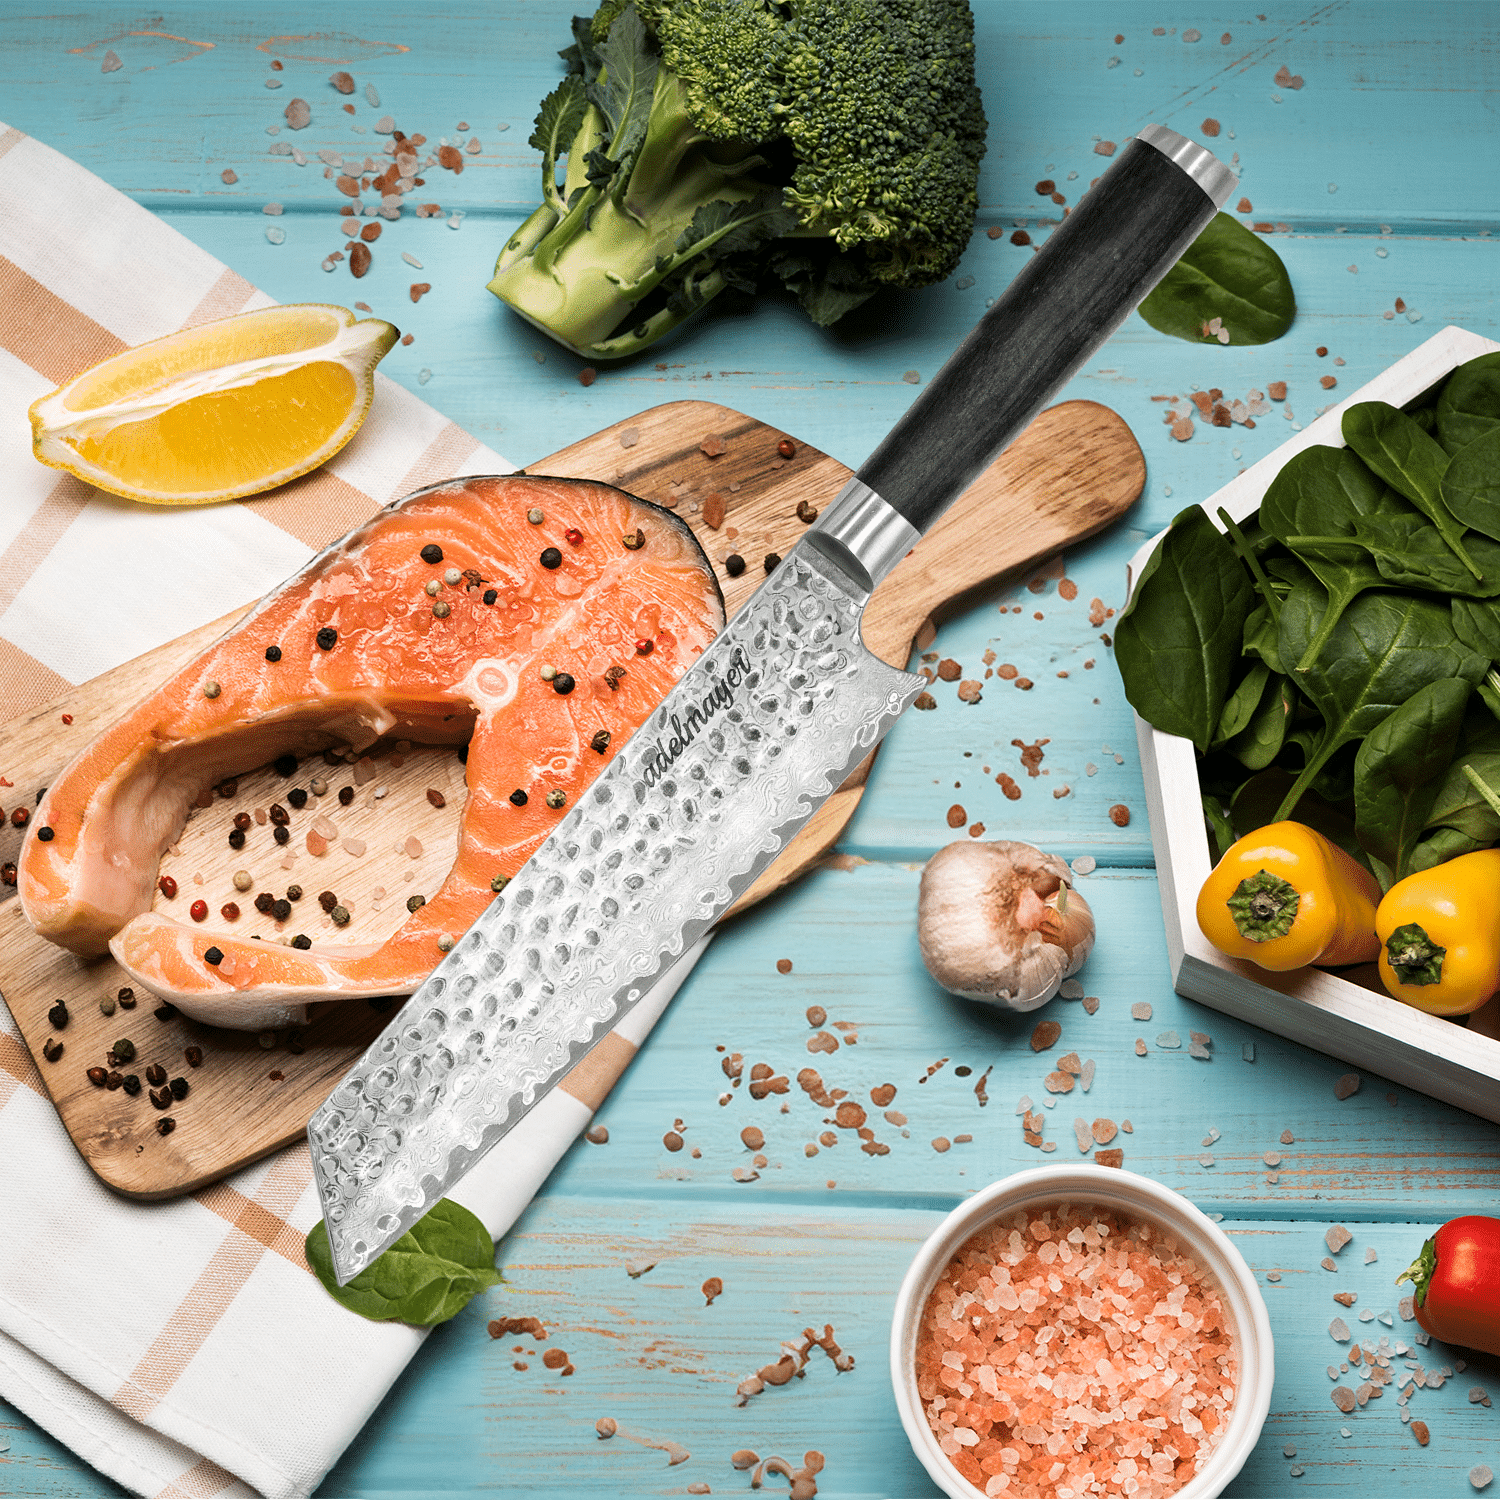 Fresh salmon and healthy ingredients on a wooden board.